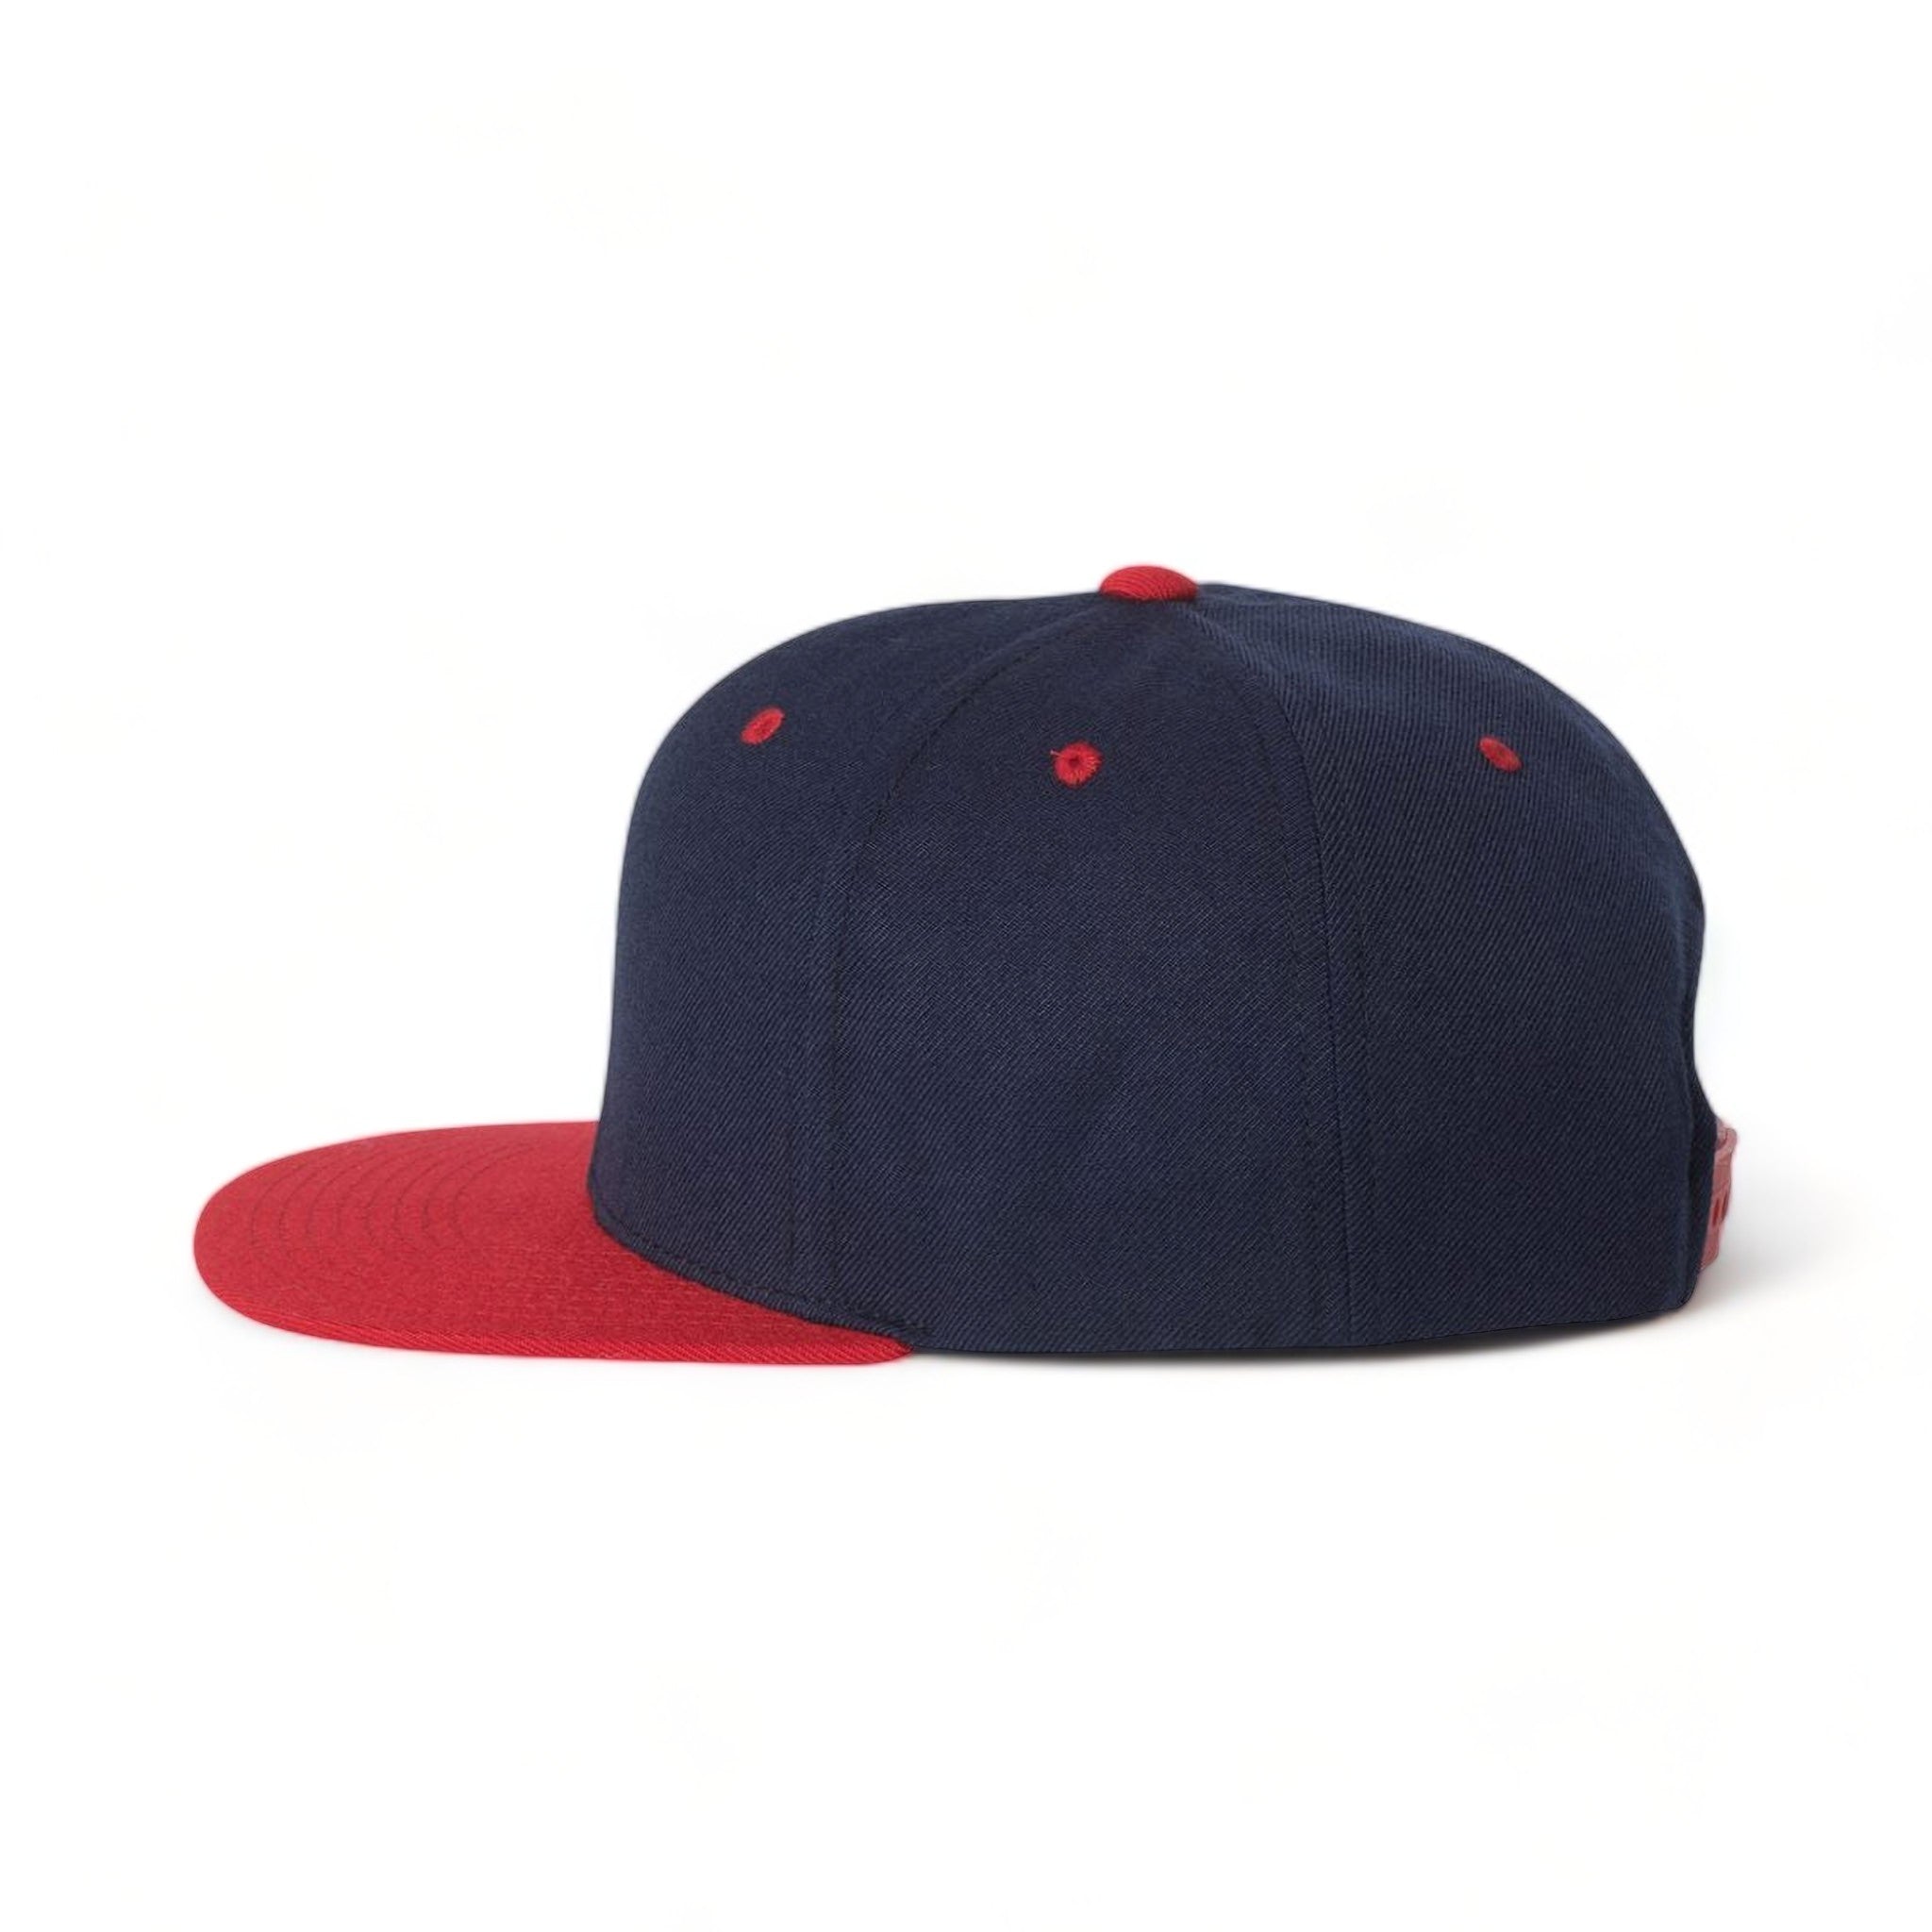 Side view of YP Classics 6089M custom hat in navy and red